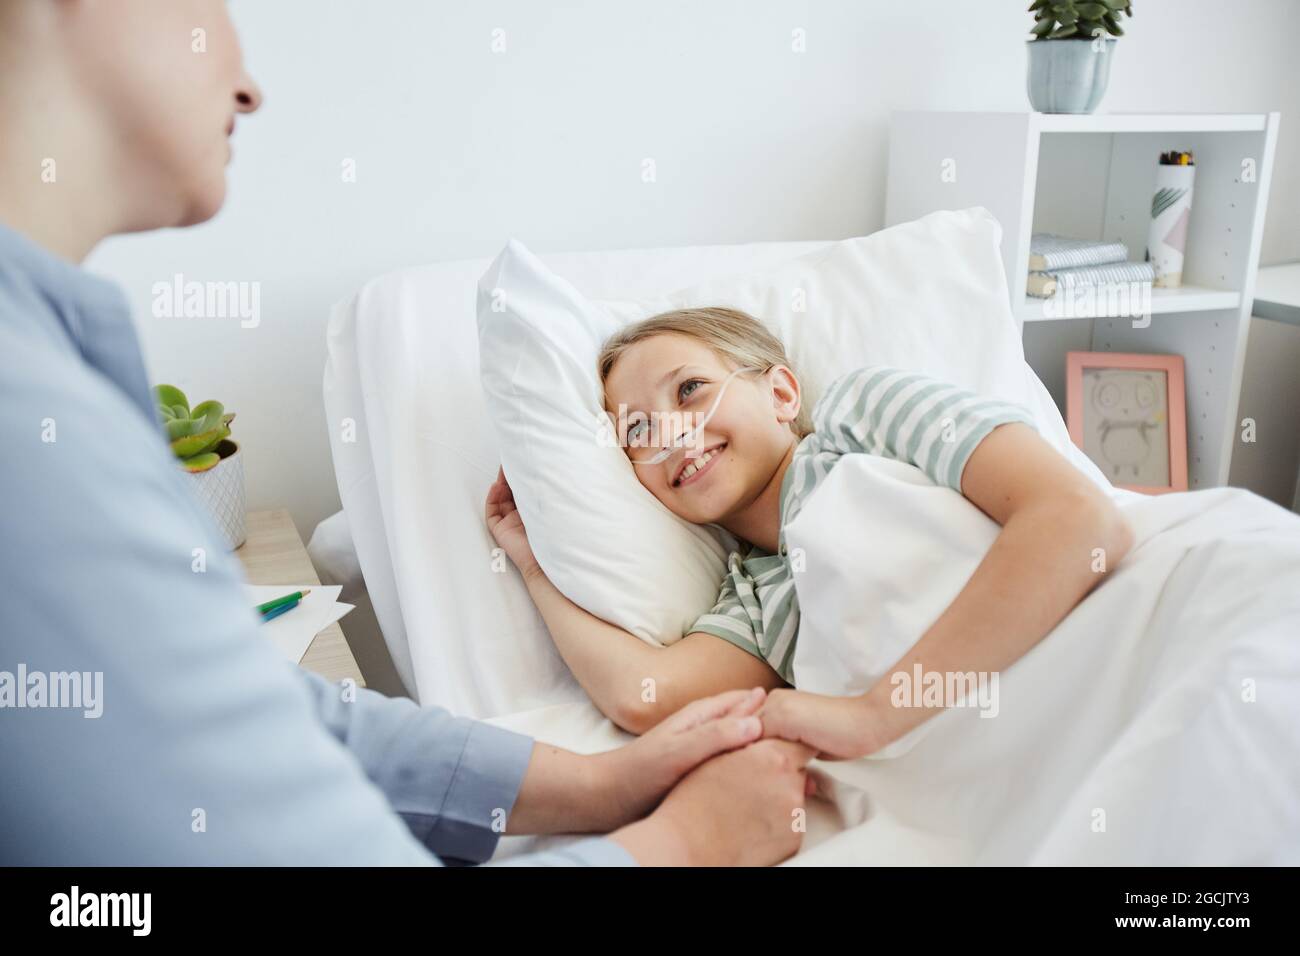 Portrait of little girl lying in hospital bed with oxygen support and smiling at mother caring for her Stock Photo